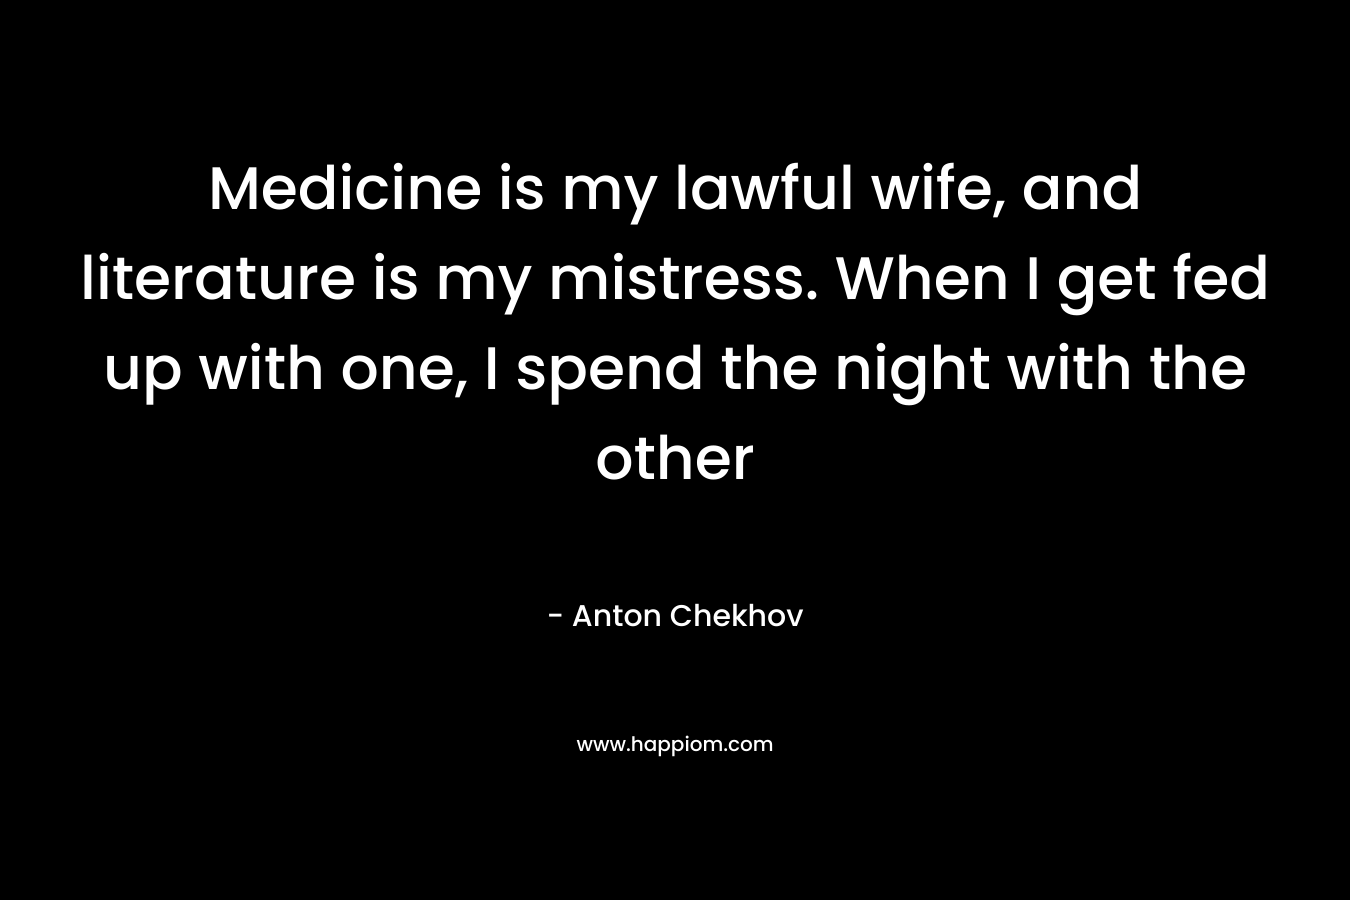 Medicine is my lawful wife, and literature is my mistress. When I get fed up with one, I spend the night with the other